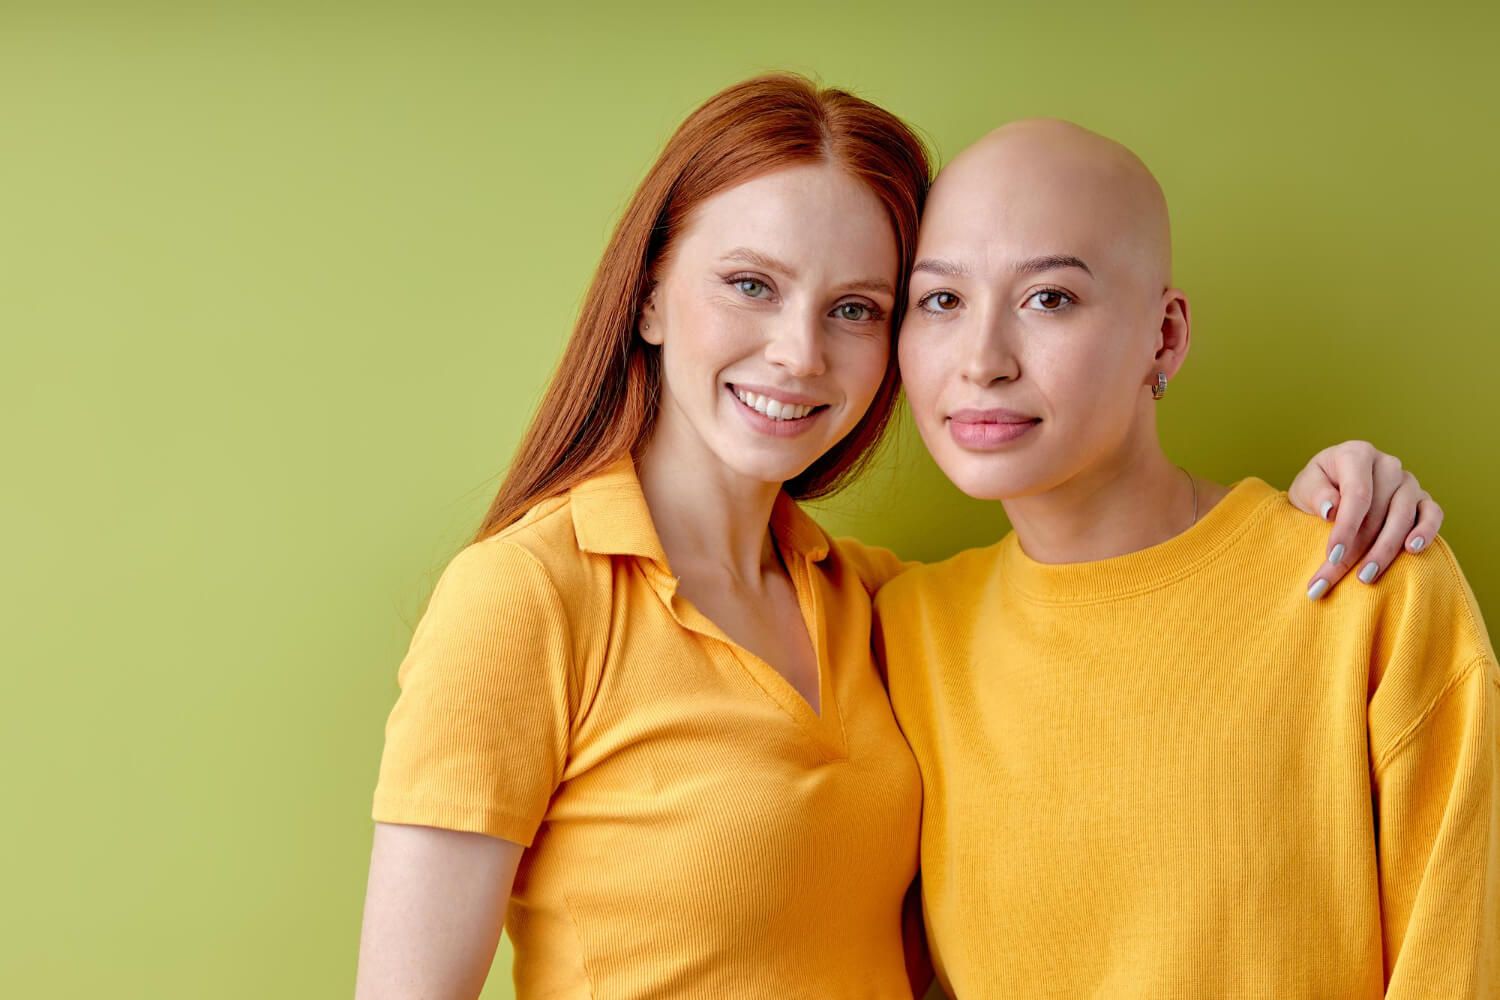 Two women sharing support, one with a bald head